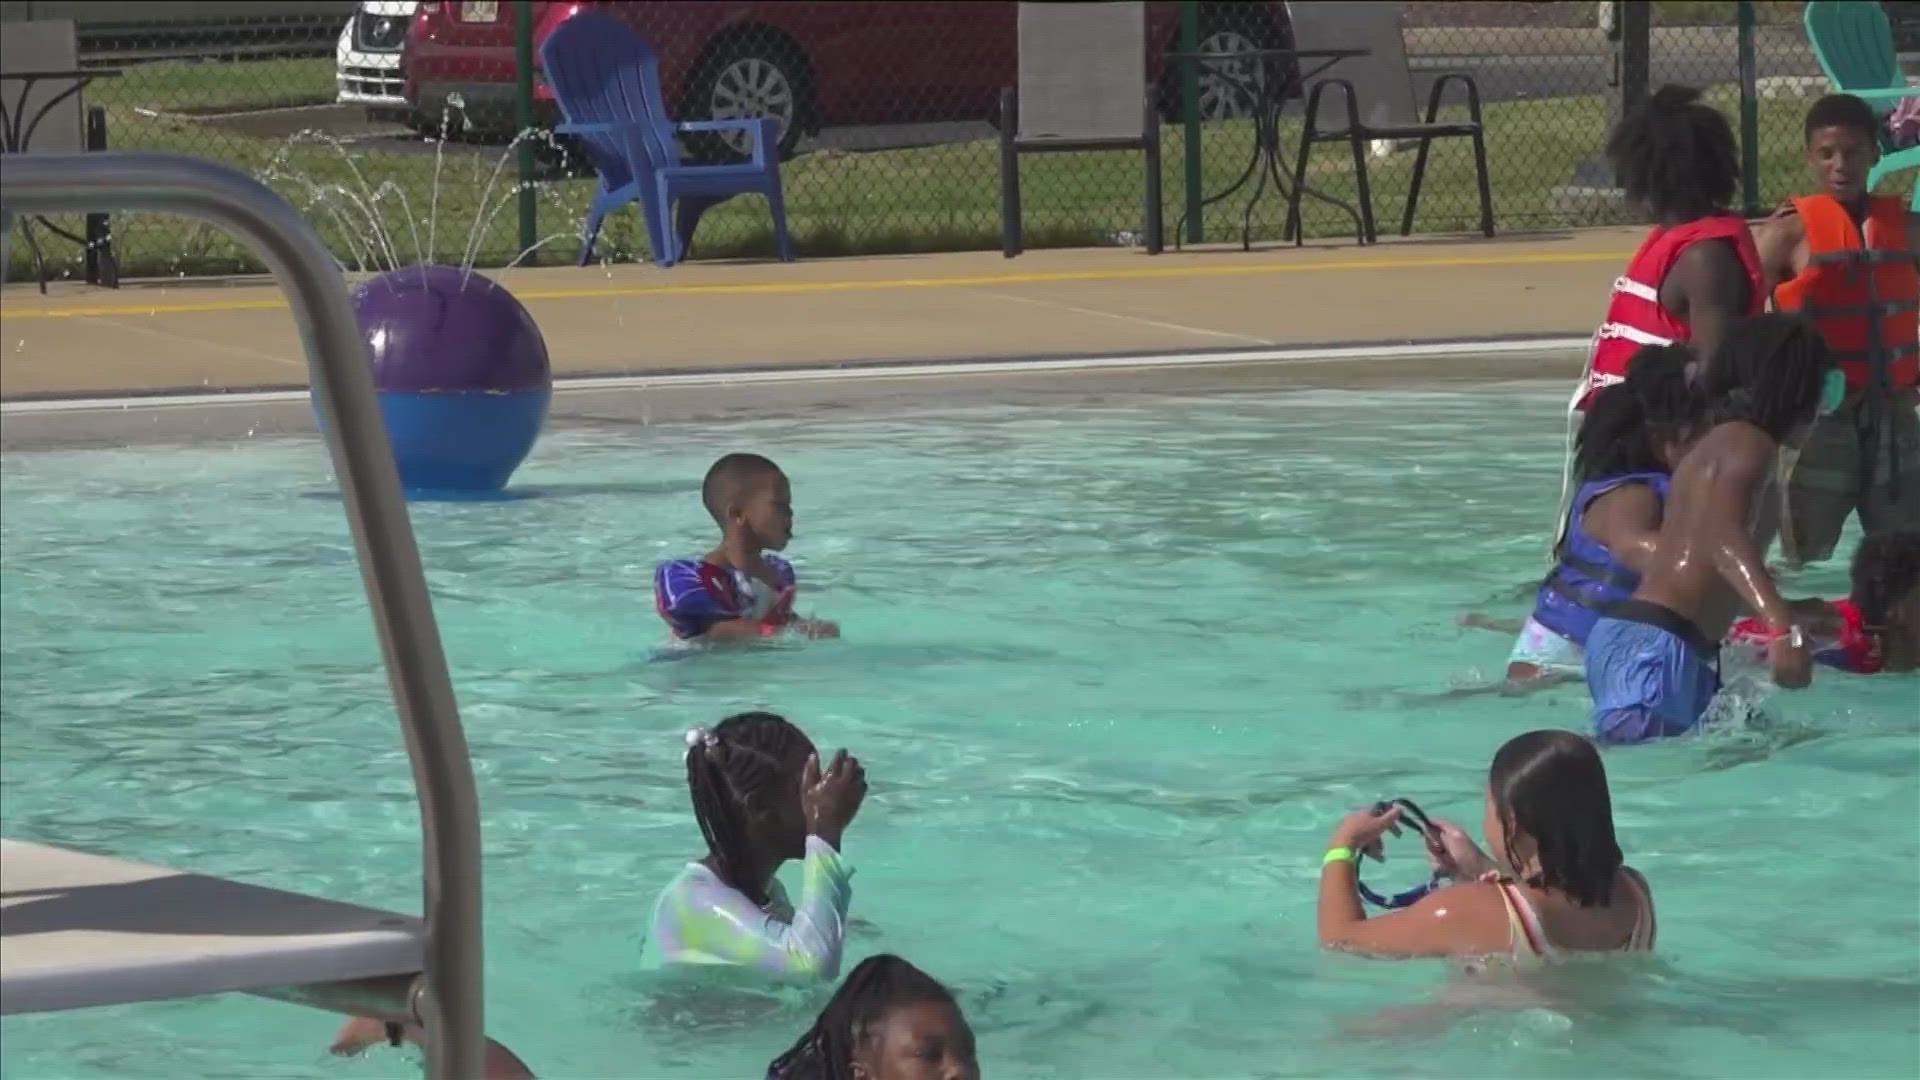 Physicians at Saint Francis Hospitals have safety reminders for kids who are going to the pool this summer.